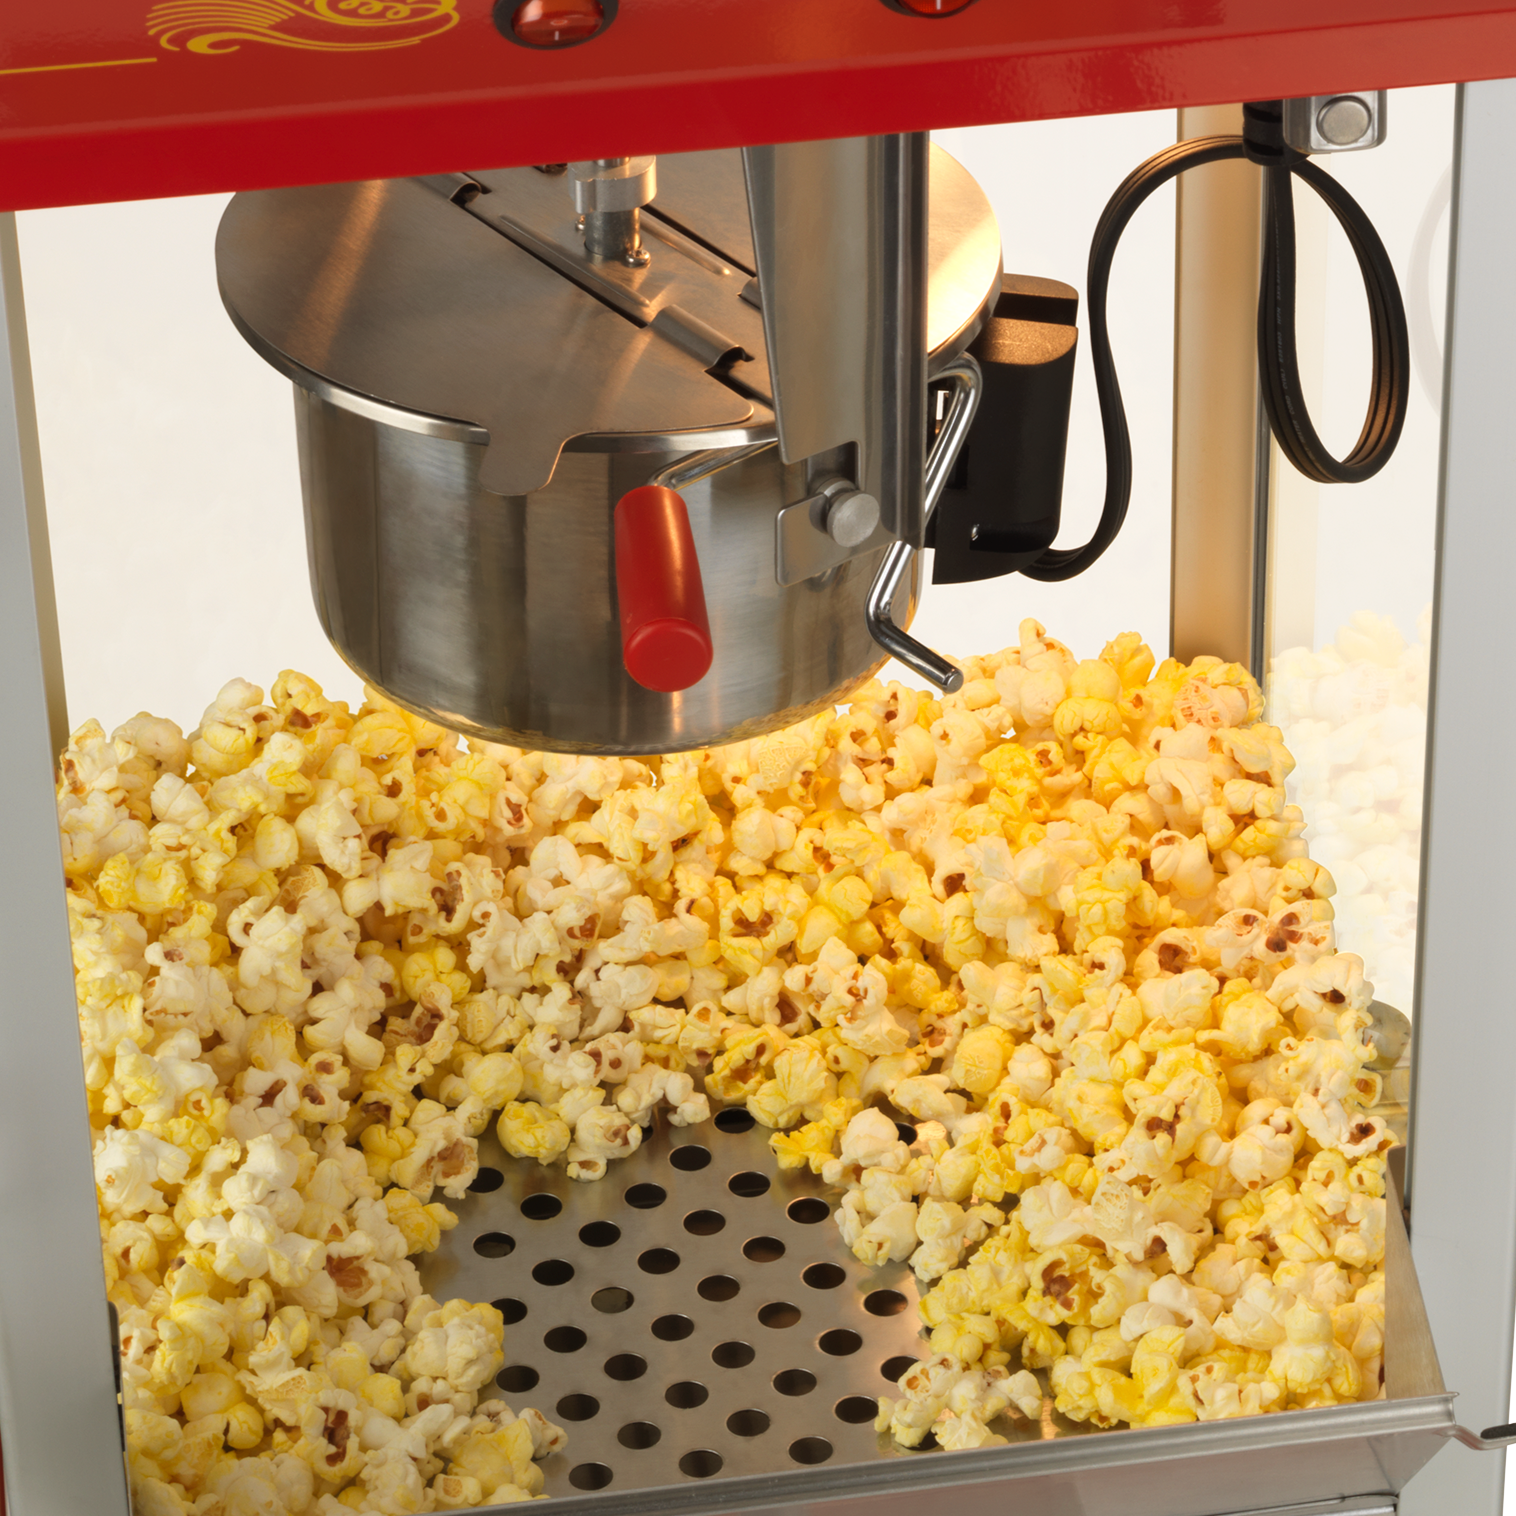 Funtime FT421CR Carnival Style 4oz Hot Oil Popcorn Machine (Red)